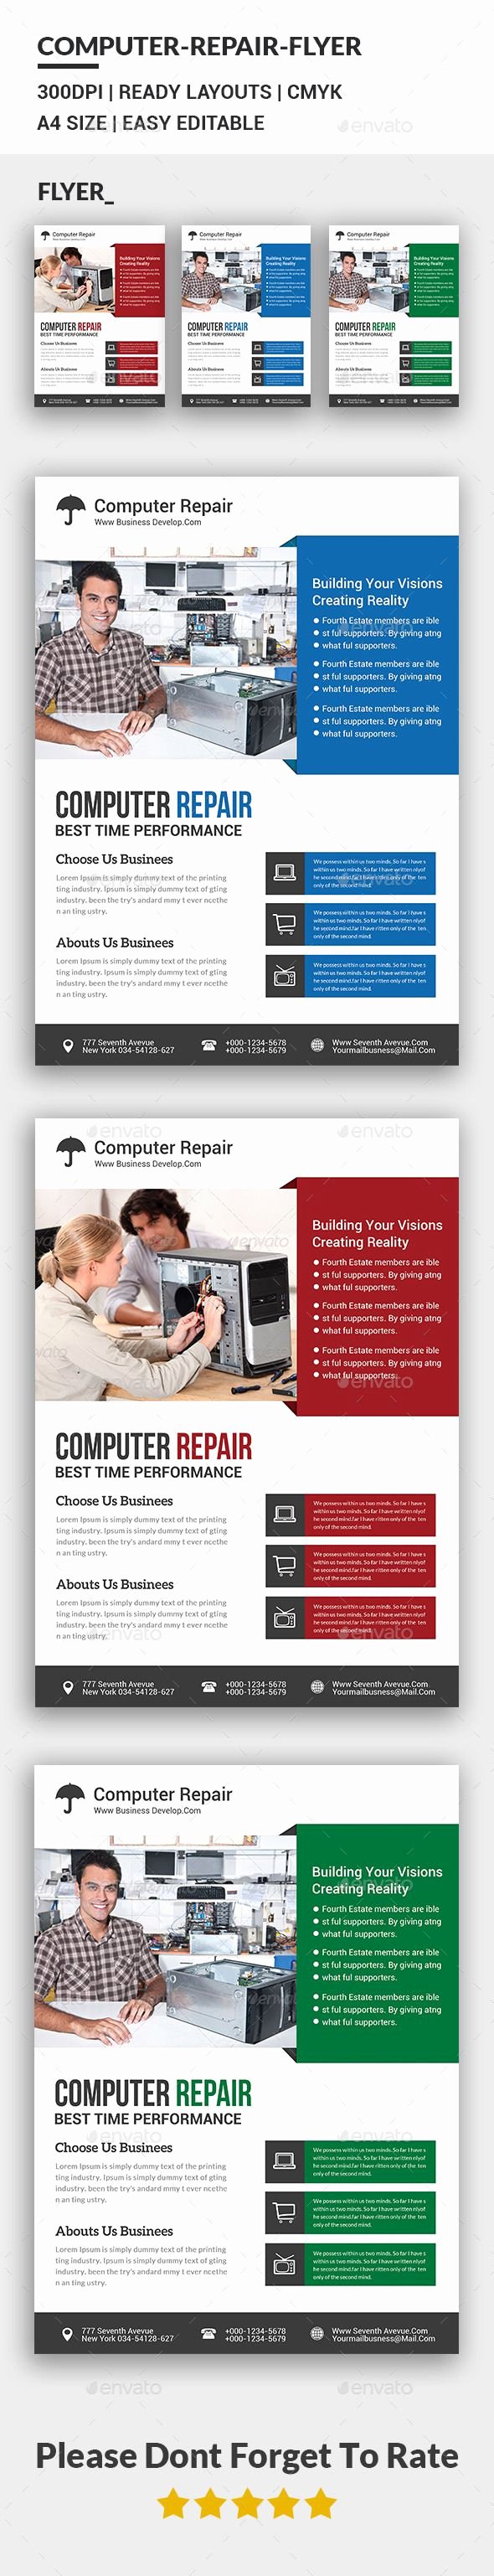 Computer Repair Flyers Templates Luxury Pin by Best Graphic Design On Flyer Templates